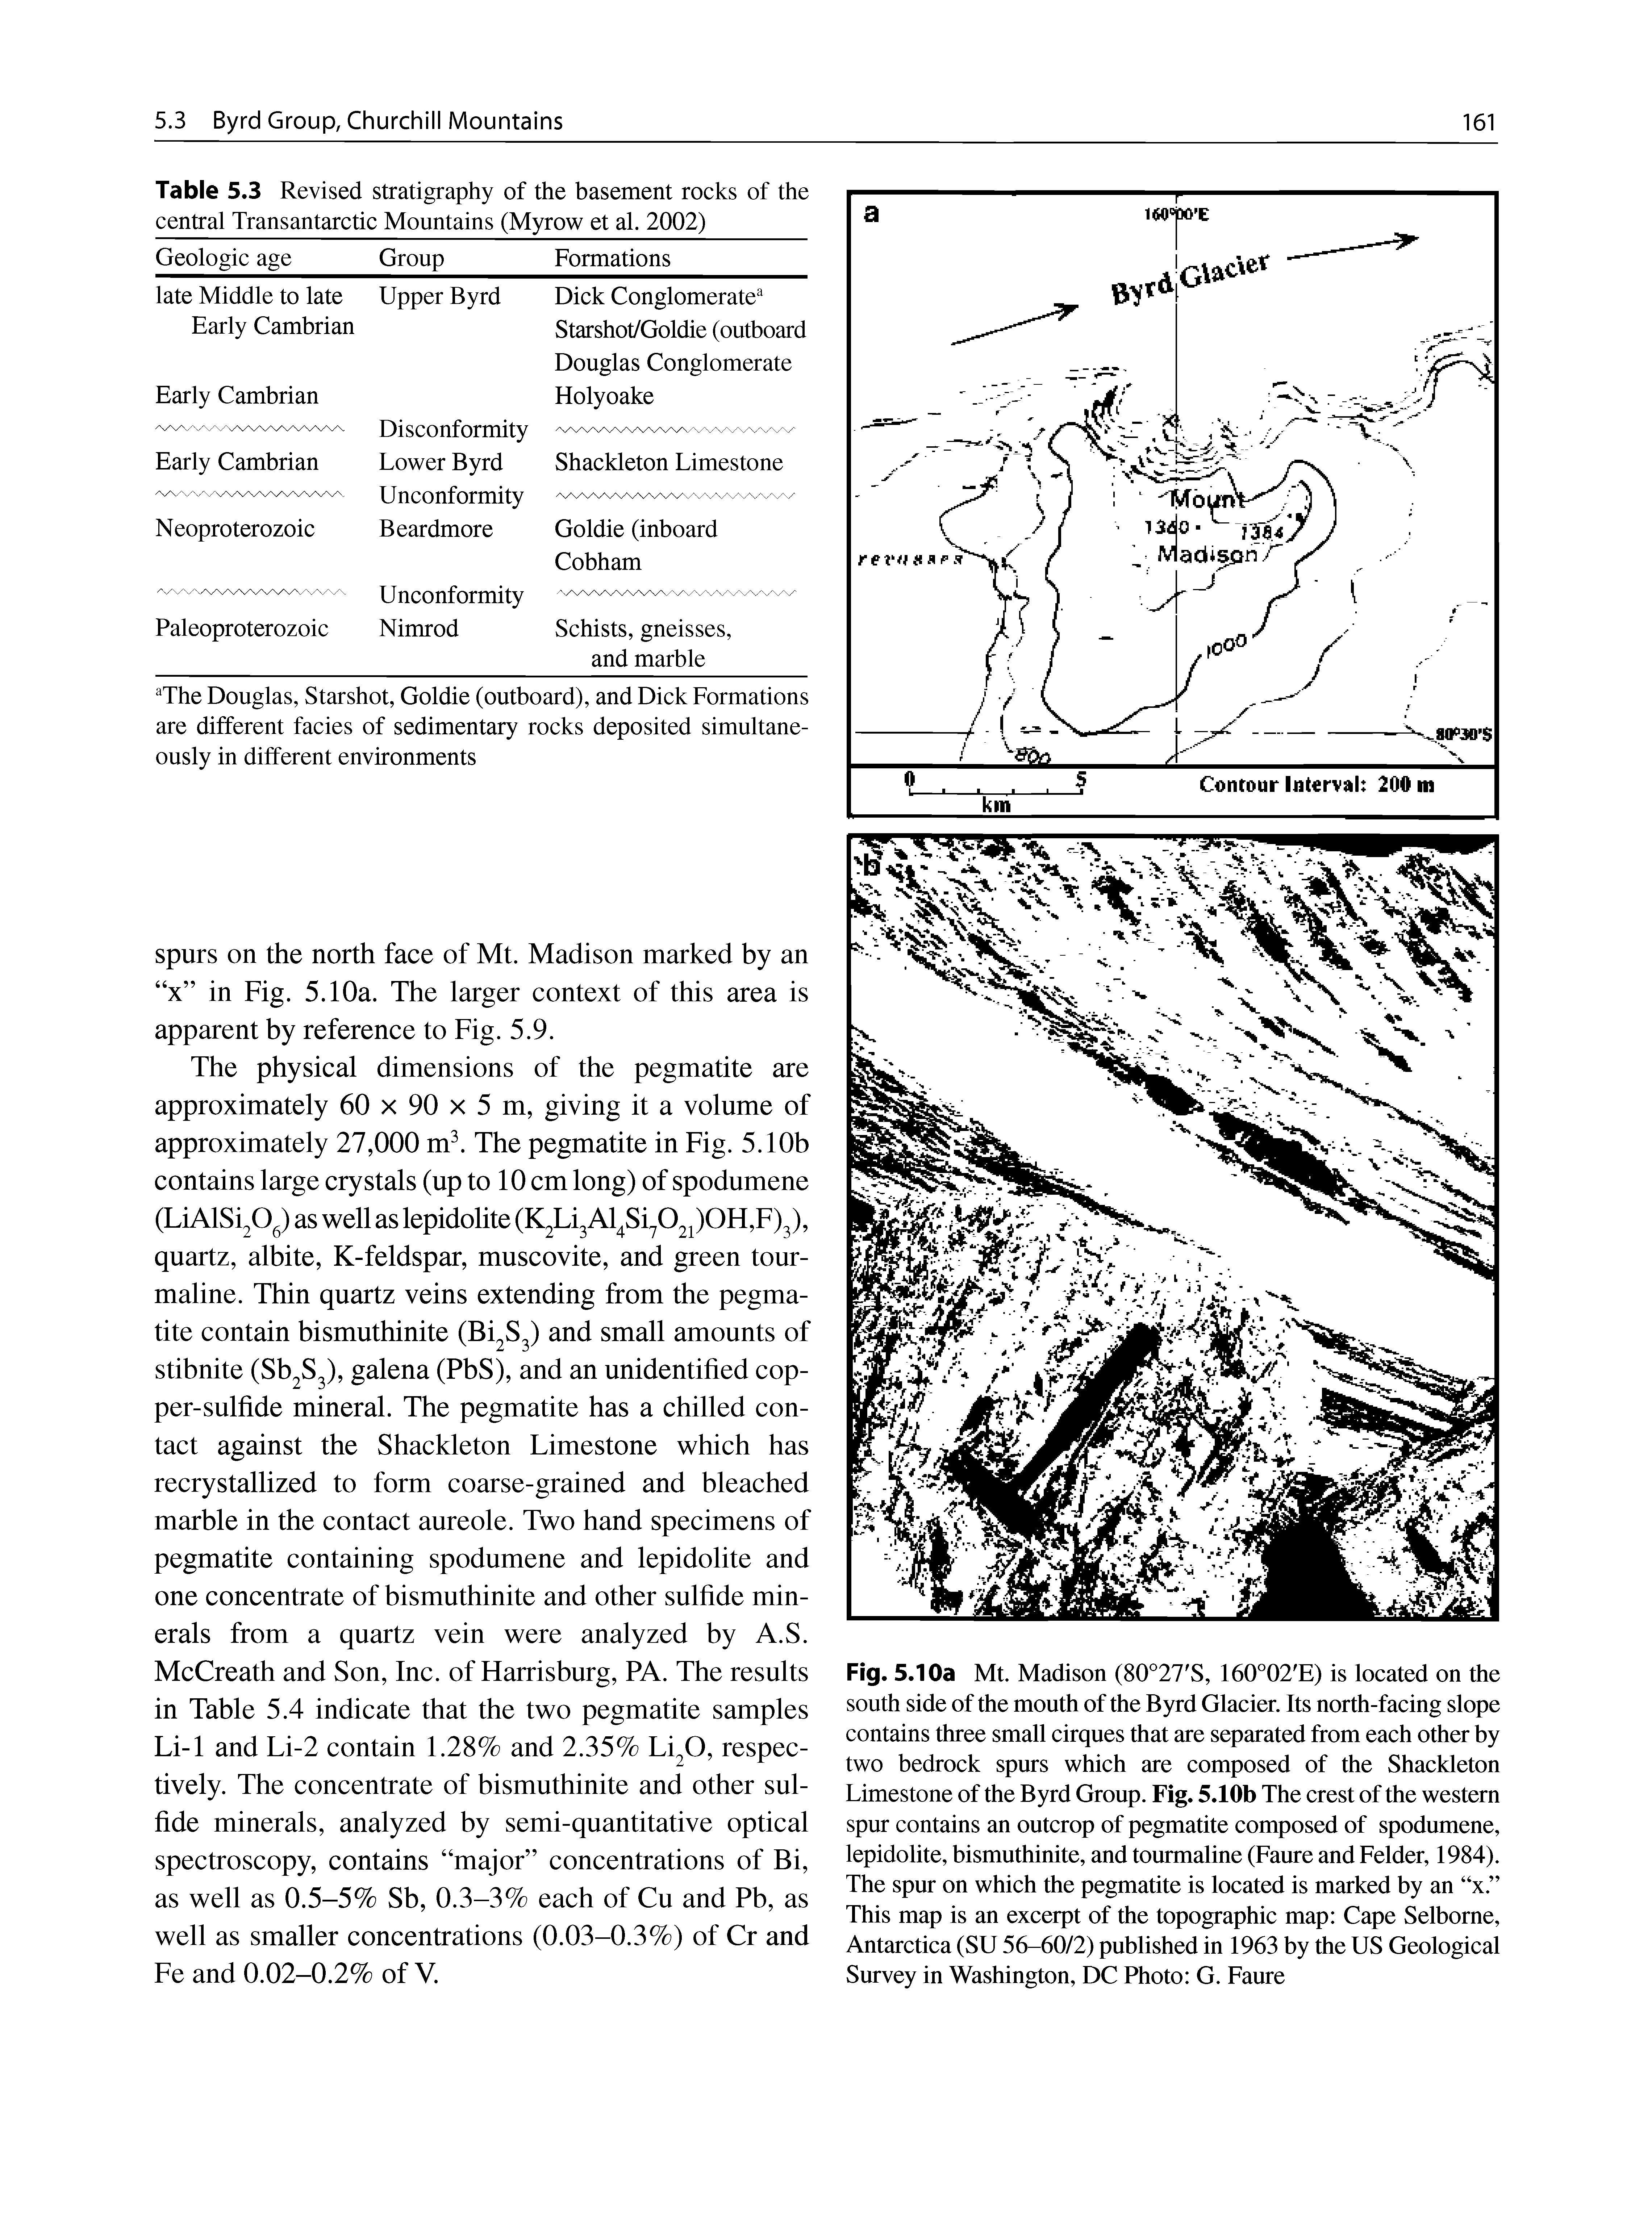 Fig. 5.10a Mt. Madison (80°27 S, 160°02 E) is located on the south side of the mouth of the Byrd Glacier. Its north-facing slope contains three small cirques that are separated from each other by two bedrock spurs which are composed of the Shackleton Limestone of the Byrd Group. Fig. 5.10b The crest of the western spur contains an outcrop of pegmatite composed of spodumene, lepidolite, bismuthinite, and tourmaline (Faure and Felder, 1984). The spur on which the pegmatite is located is marked by an x. This map is an excerpt of the topographic map Cape Selborne, Antarctica (SU 56-60/2) published in 1963 by the US Geological Survey in Washington, DC Photo G. Faure...